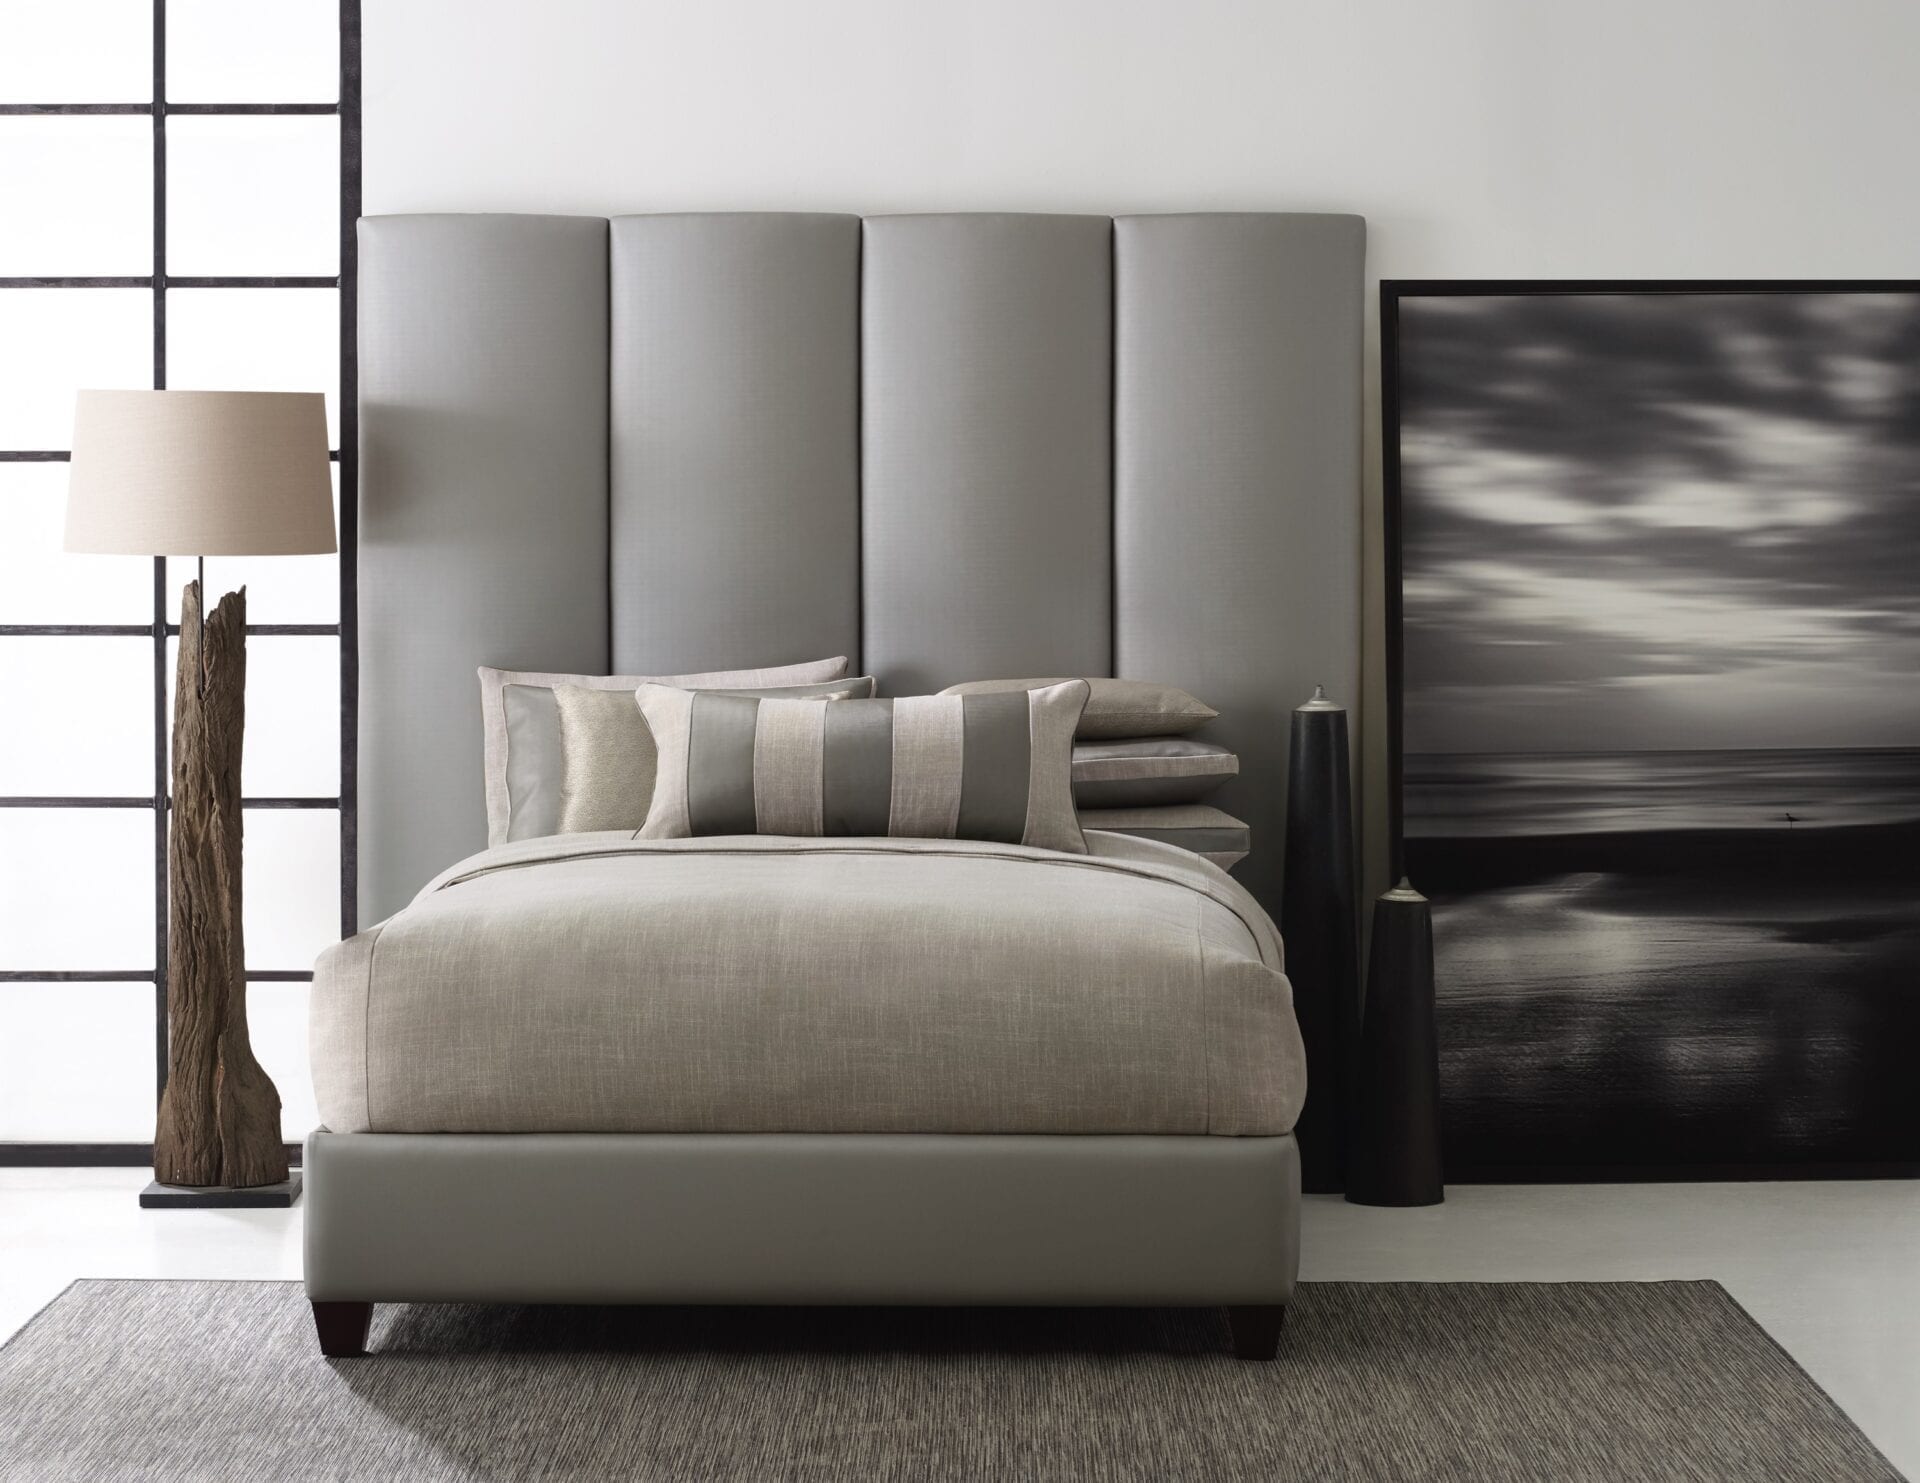 Chloe - Wall mounted upholstered, luxury headboard with custom upholstered wall panels - Custom luxury, upholstered beds with high end, bedroom textiles | Blend Home Furnishings